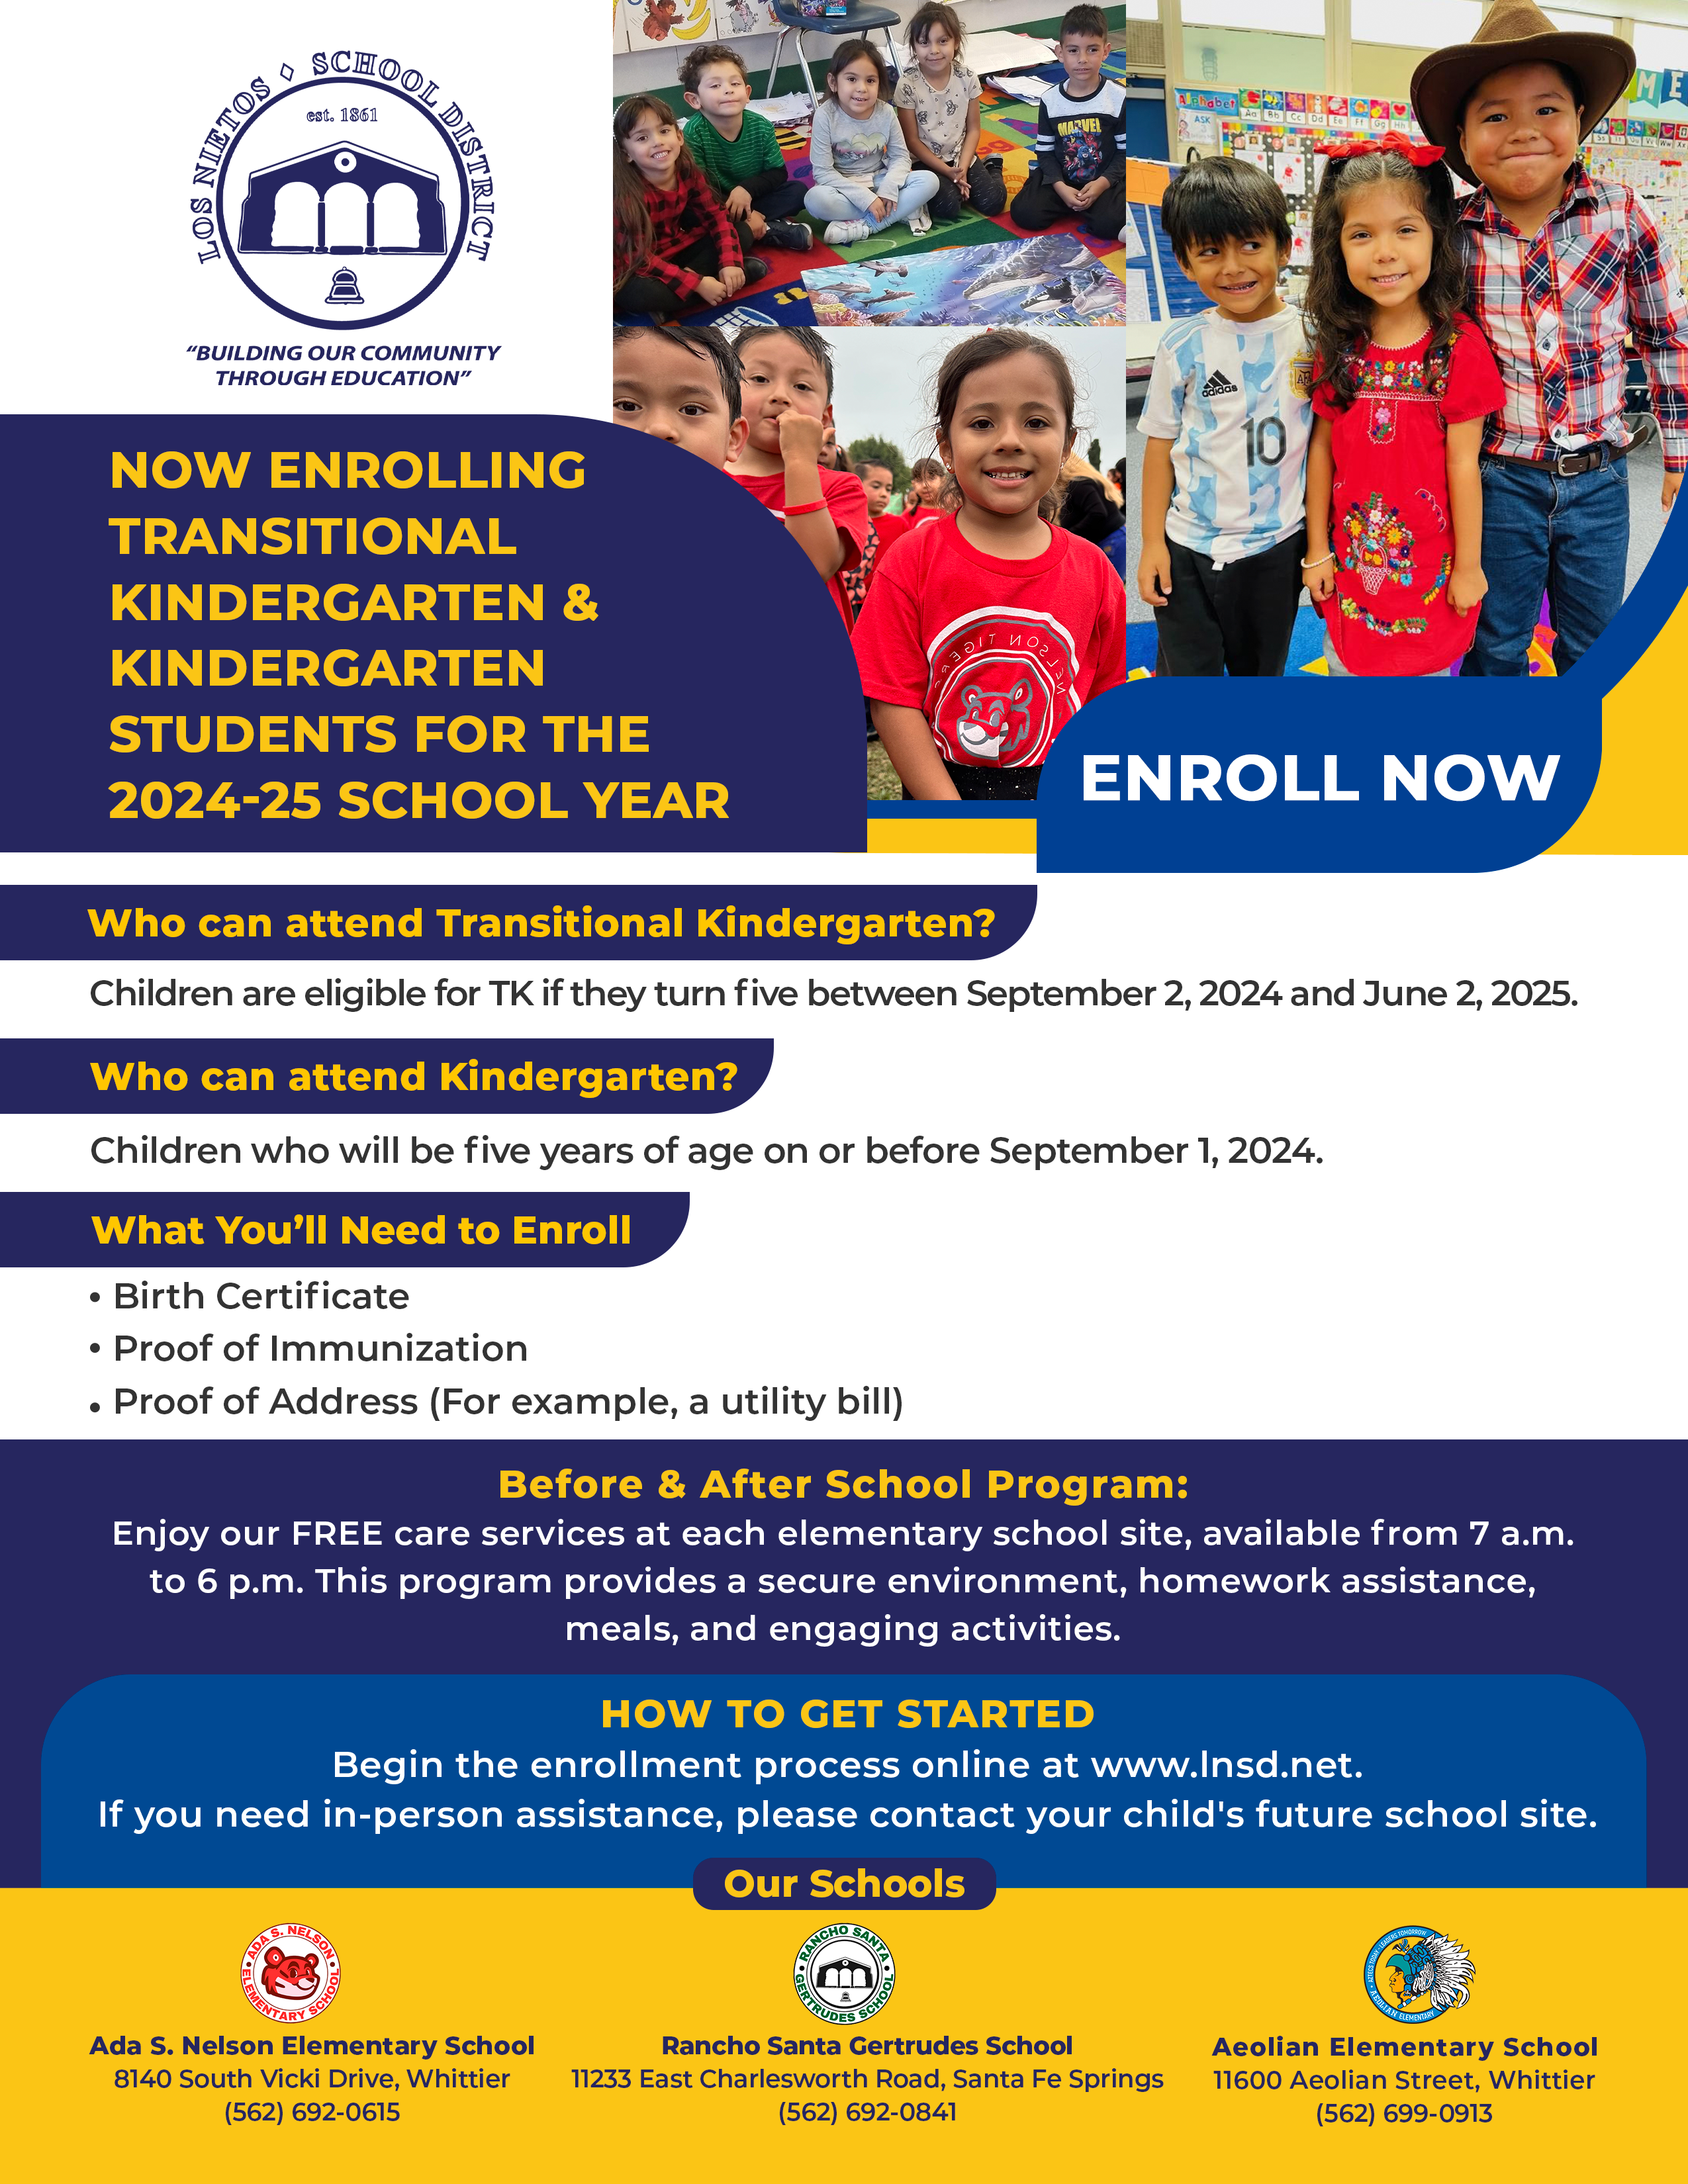 A colorful flyer for the Los Nietos School District announcing enrollment for Transitional Kindergarten and Kindergarten for the 2024-25 school year. The top of the flyer features the district's logo and motto 'BUILDING OUR COMMUNITY THROUGH EDUCATION' against a blue background. A large yellow graphic element contains the text 'ENROLL NOW' in bold, white lettering. The flyer provides details on who can attend, what documents are needed for enrollment, information about before and after school programs, and how to get started with enrollment online.